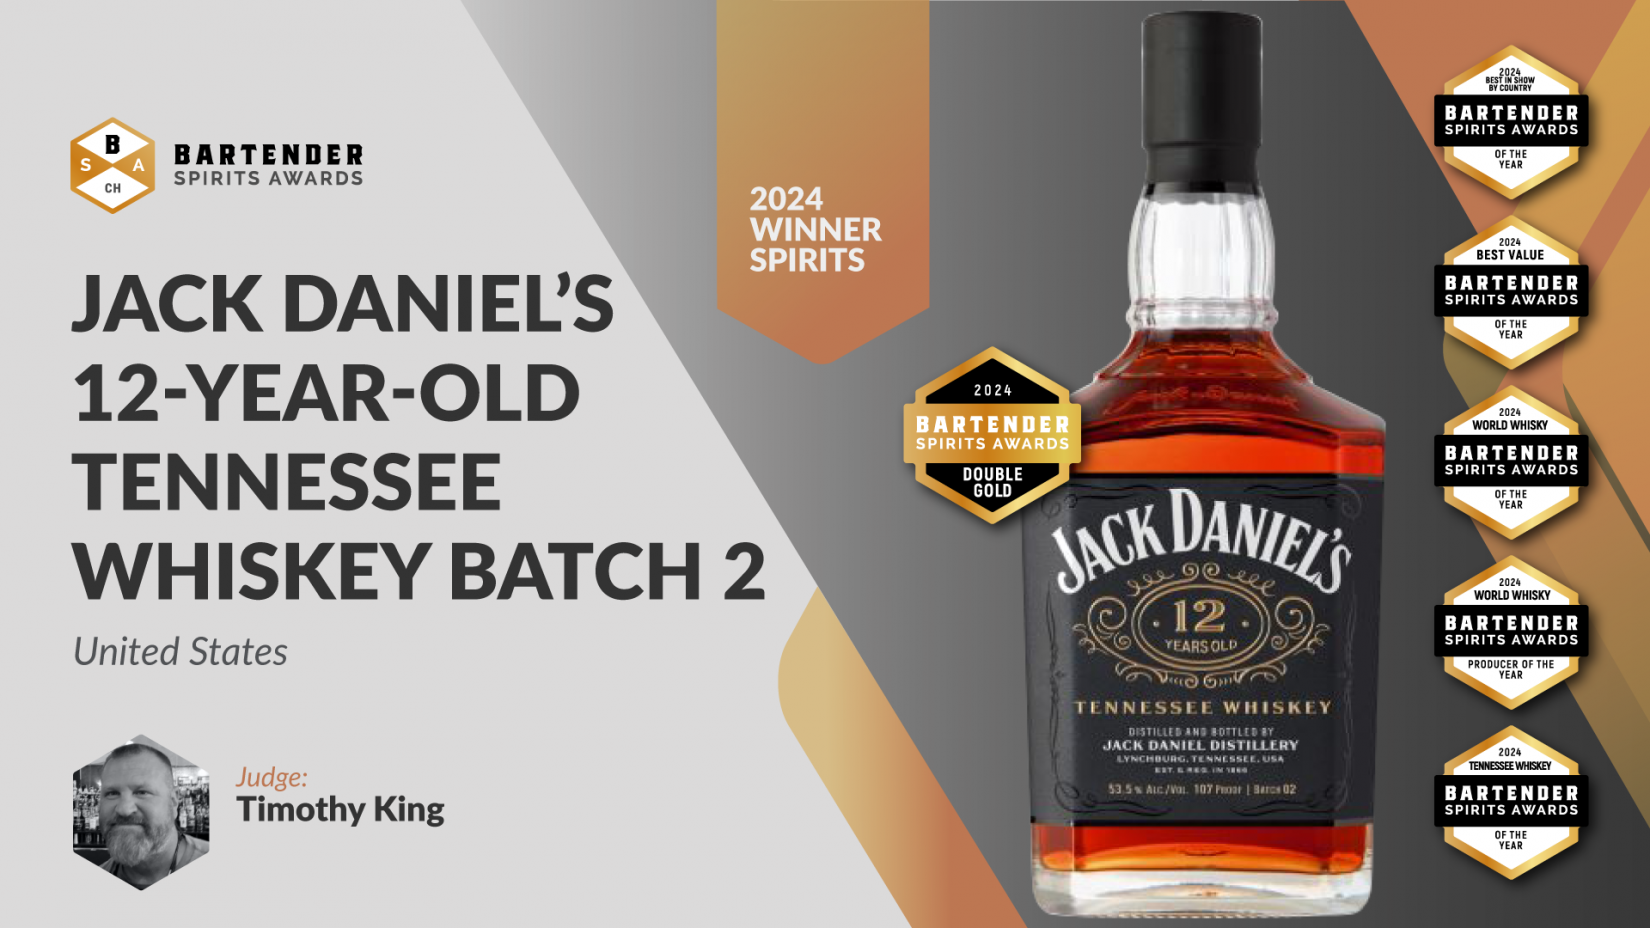 Photo for: Jack Daniel’s 12 Year Old Tennessee Whiskey Batch 2